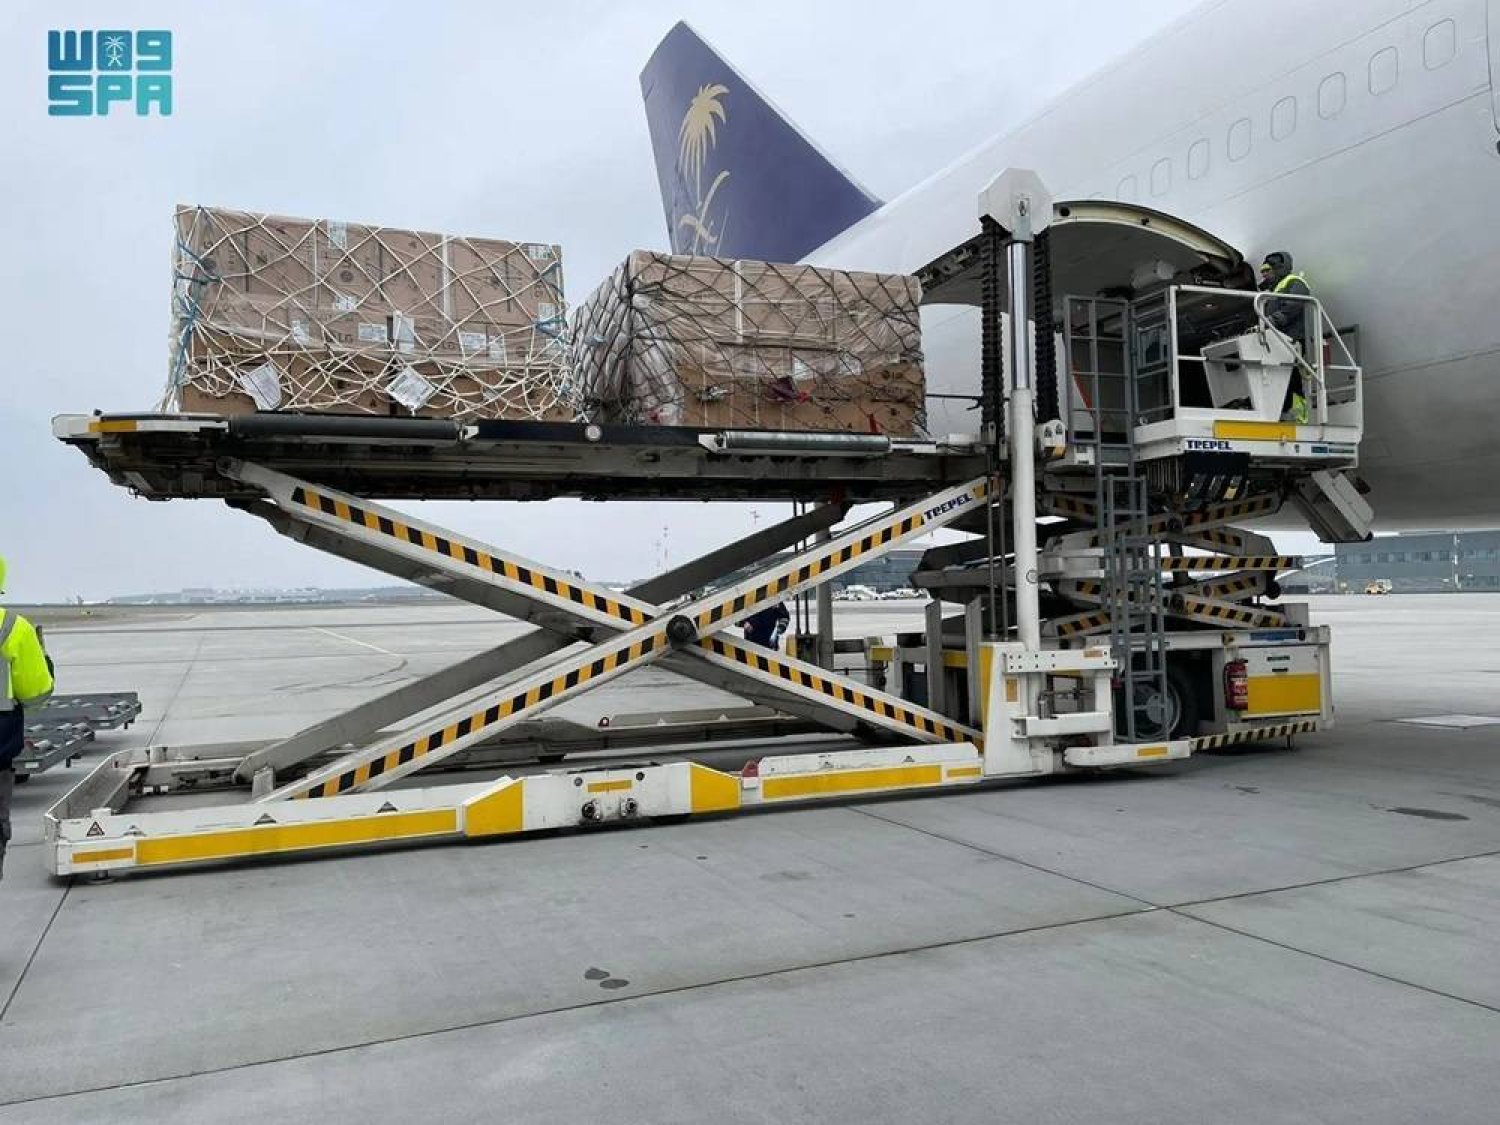 The 11th Saudi relief plane operated by the King Salman Humanitarian Aid and Relief Center (KSrelief) arrived in Poland in Friday ahead of heading to Ukraine. (SPA)